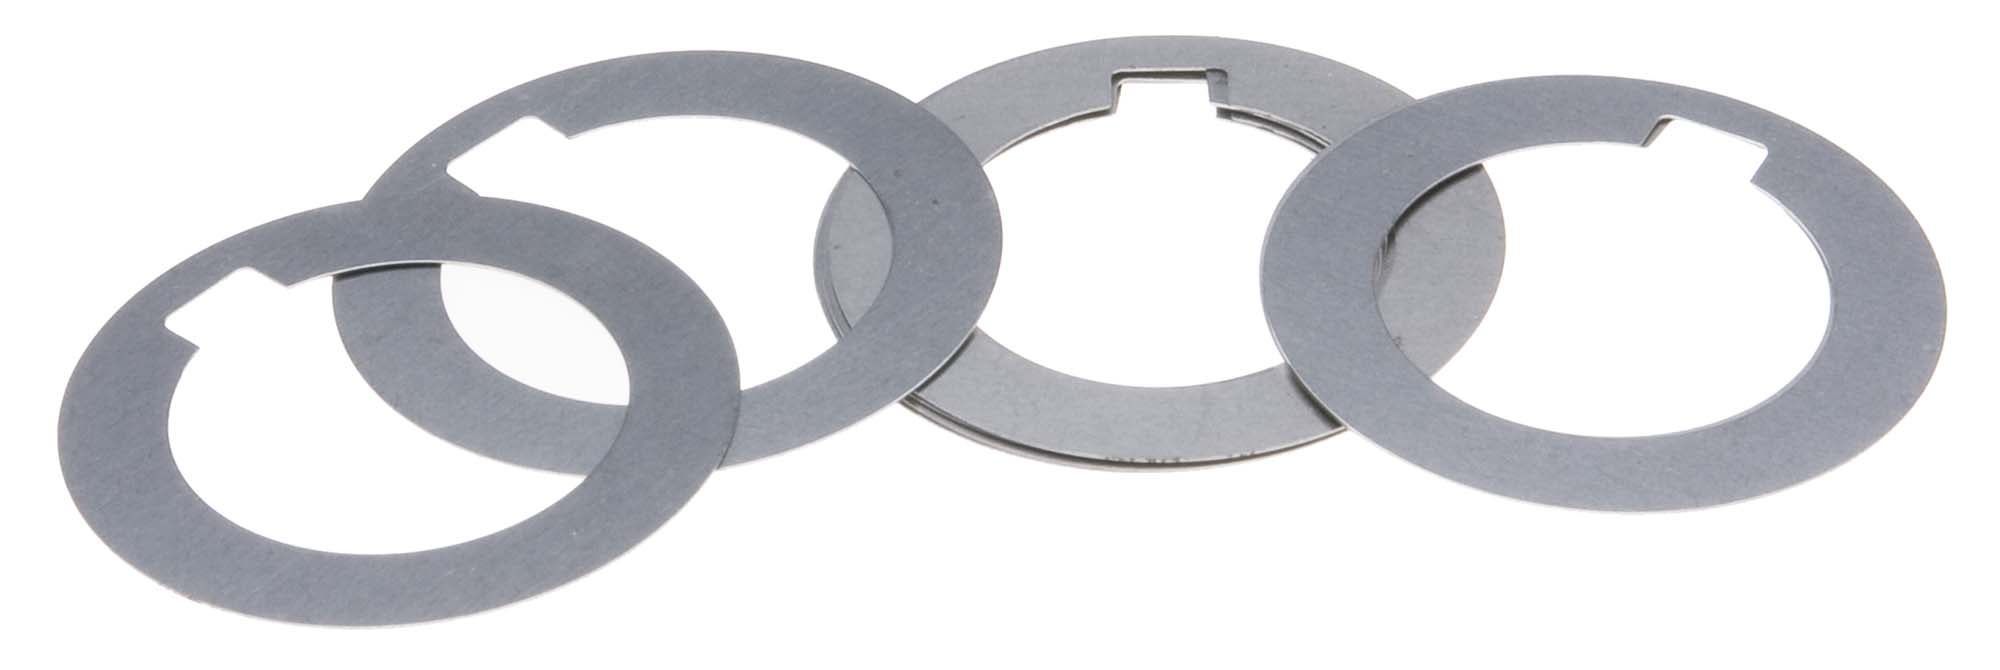 .012" Arbor Spacer Shims 1" ID-10 pc